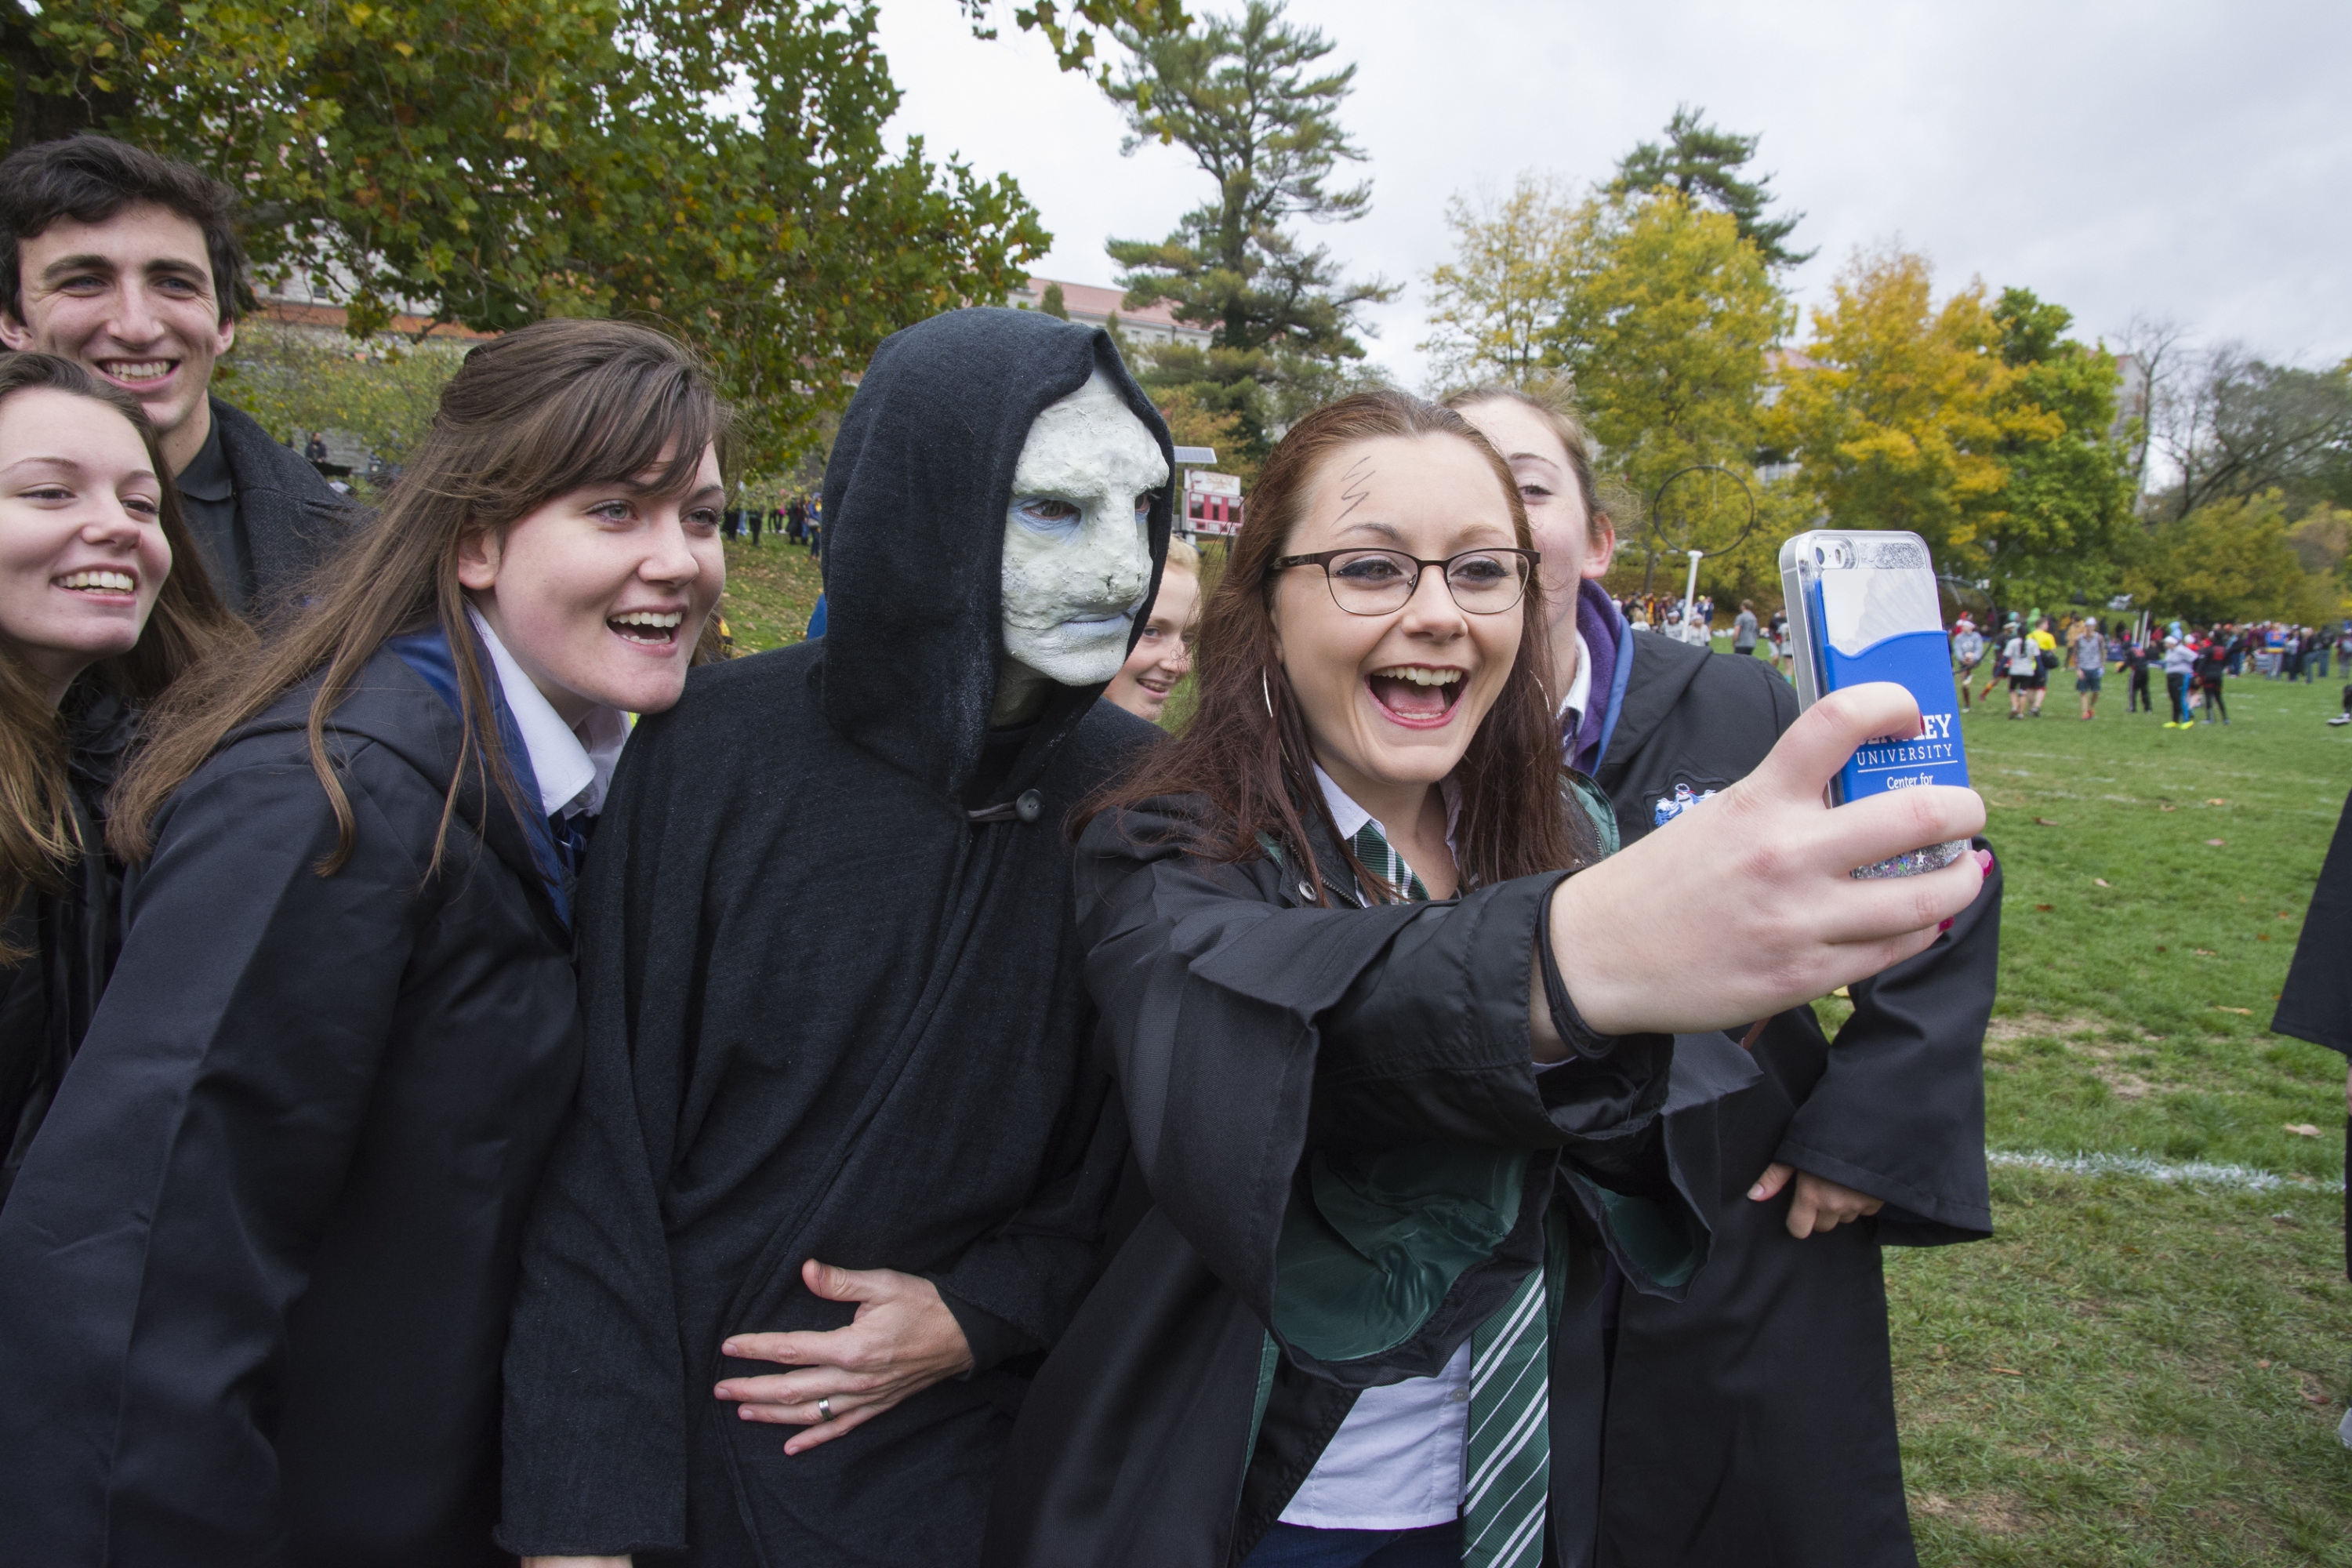 Festival goers stop to snap a quick selfie with "he who must not be named."